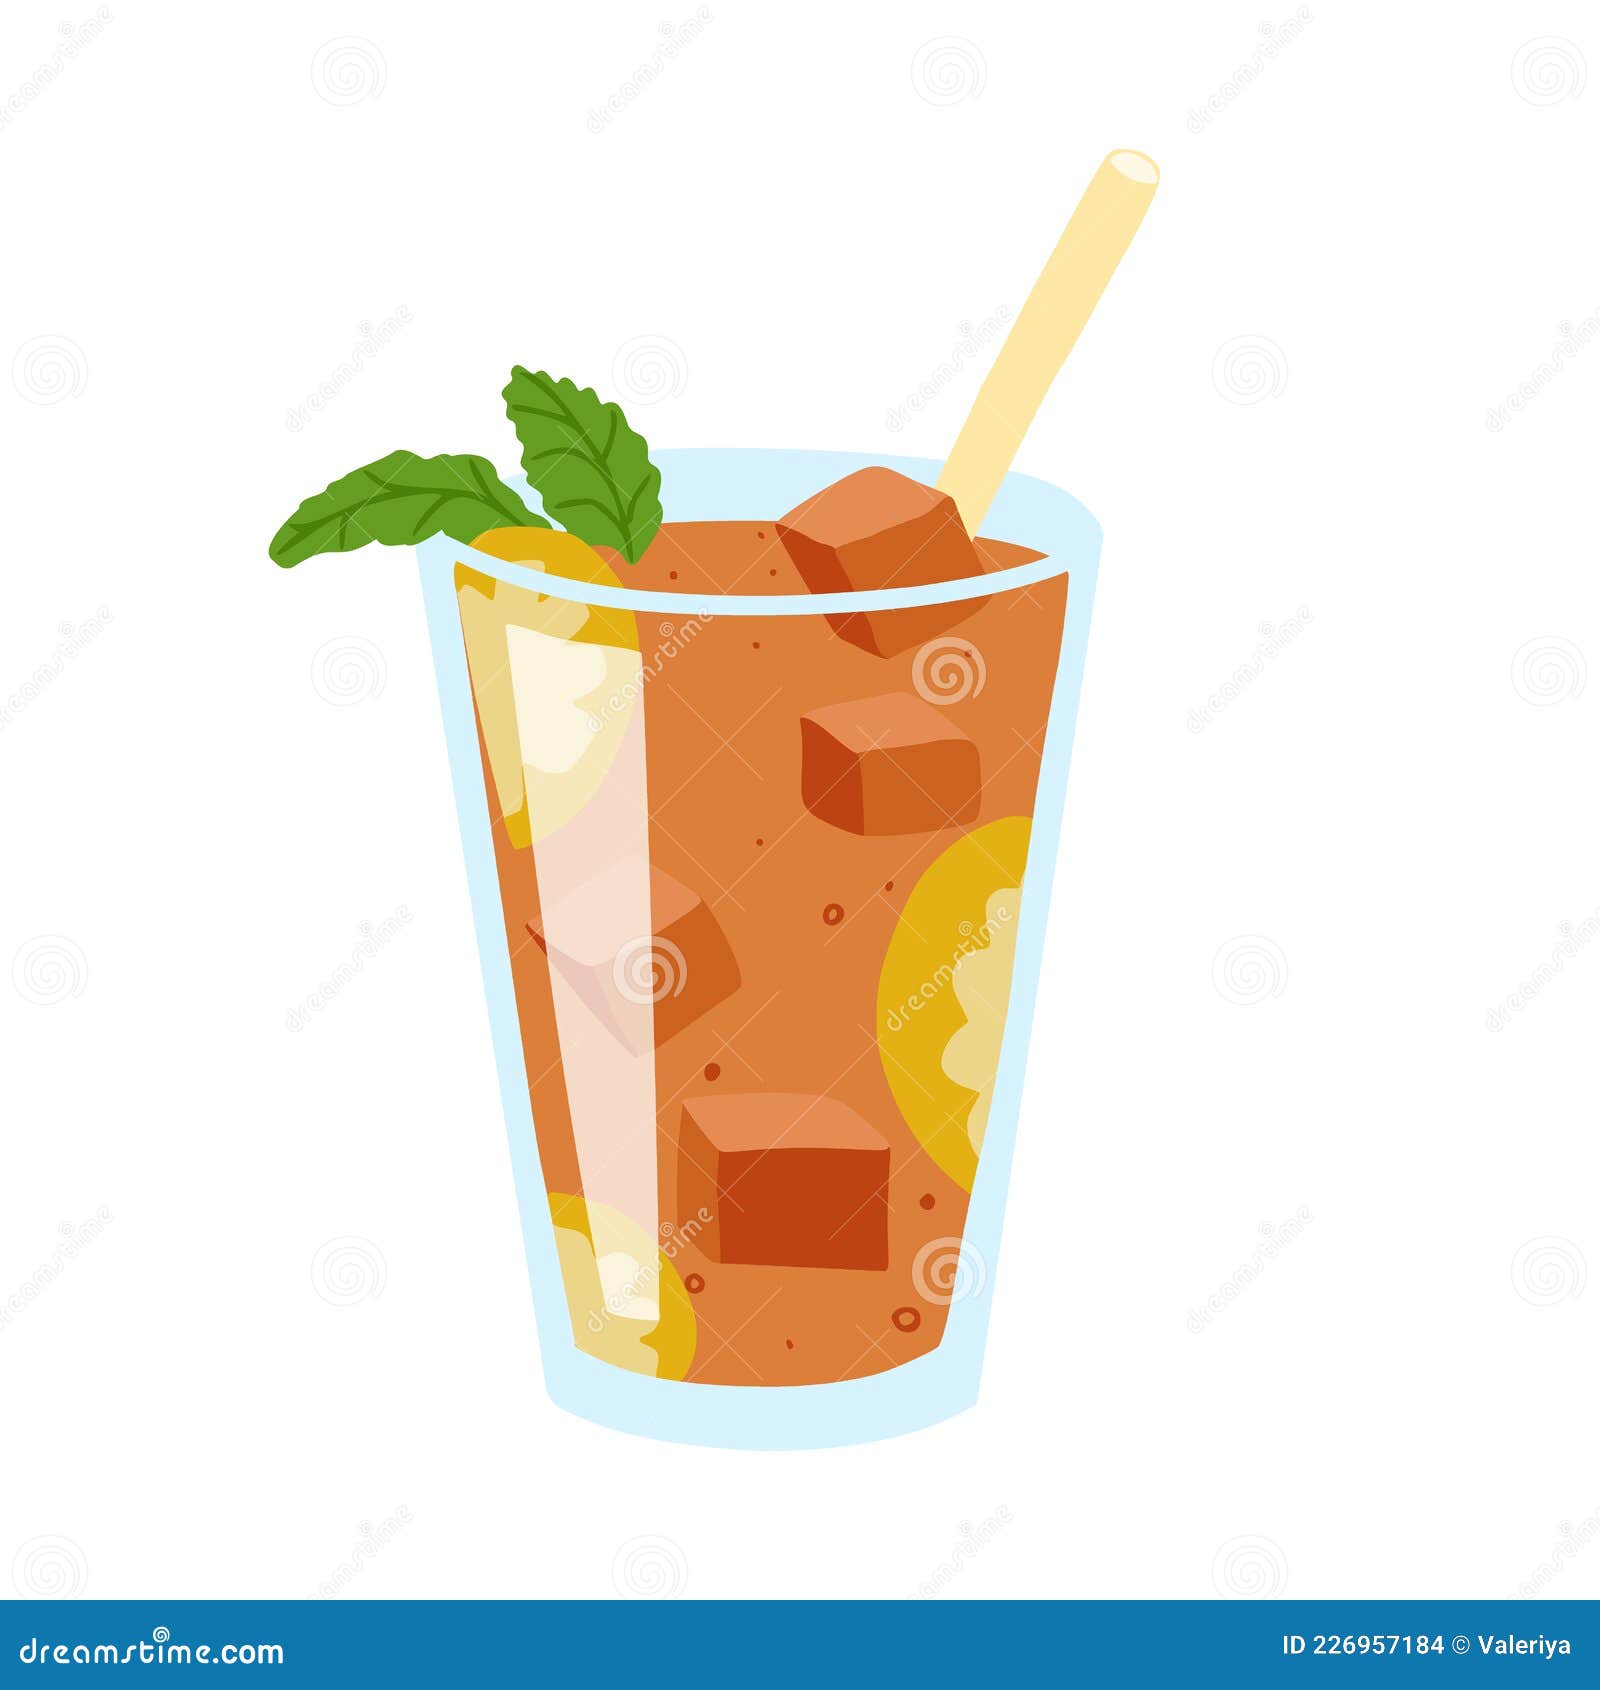 Plastic cup with lid. Ice tea with sliced lemon and mint. Abstract concept.  Vector illustration. Stock Vector